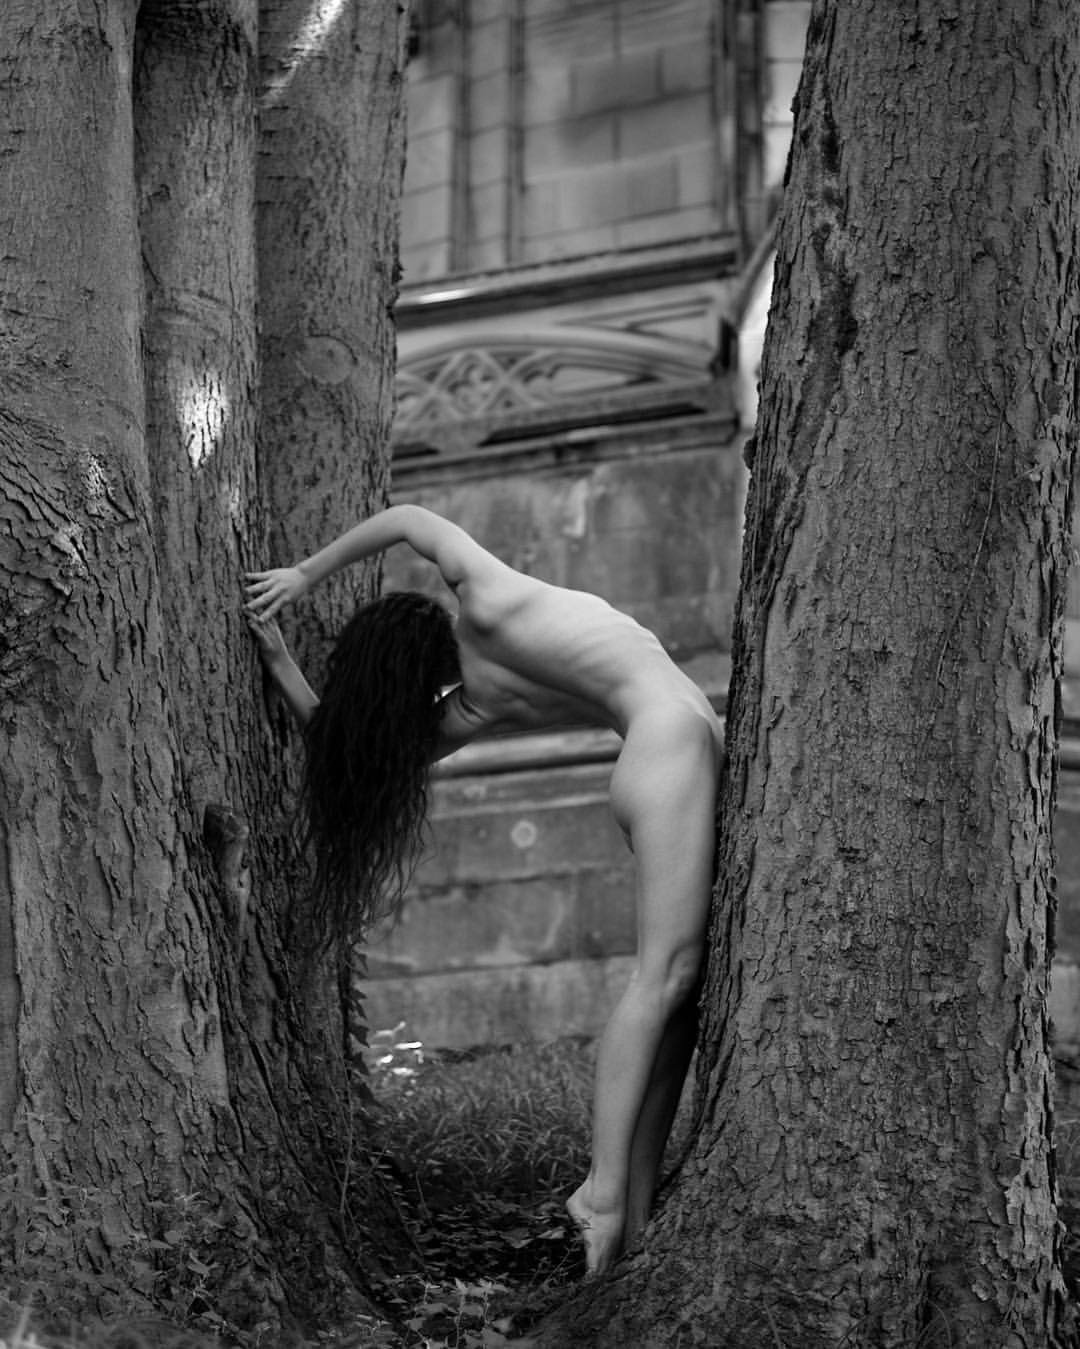 Photo by rysvdcafeq with the username @rysvdcafeq,  April 3, 2017 at 11:42 PM and the text says 'terryeaton:

Kelsey | @kelseydylan #model #travelingmodel #figuremodel #nudemodel #artnude #nude #outside #outdoors #nature #naturallight #naturalbeauty #allnatural #bw #bwphotography #blackandwhite #pr0ject_uno #pr0ject_bnw'